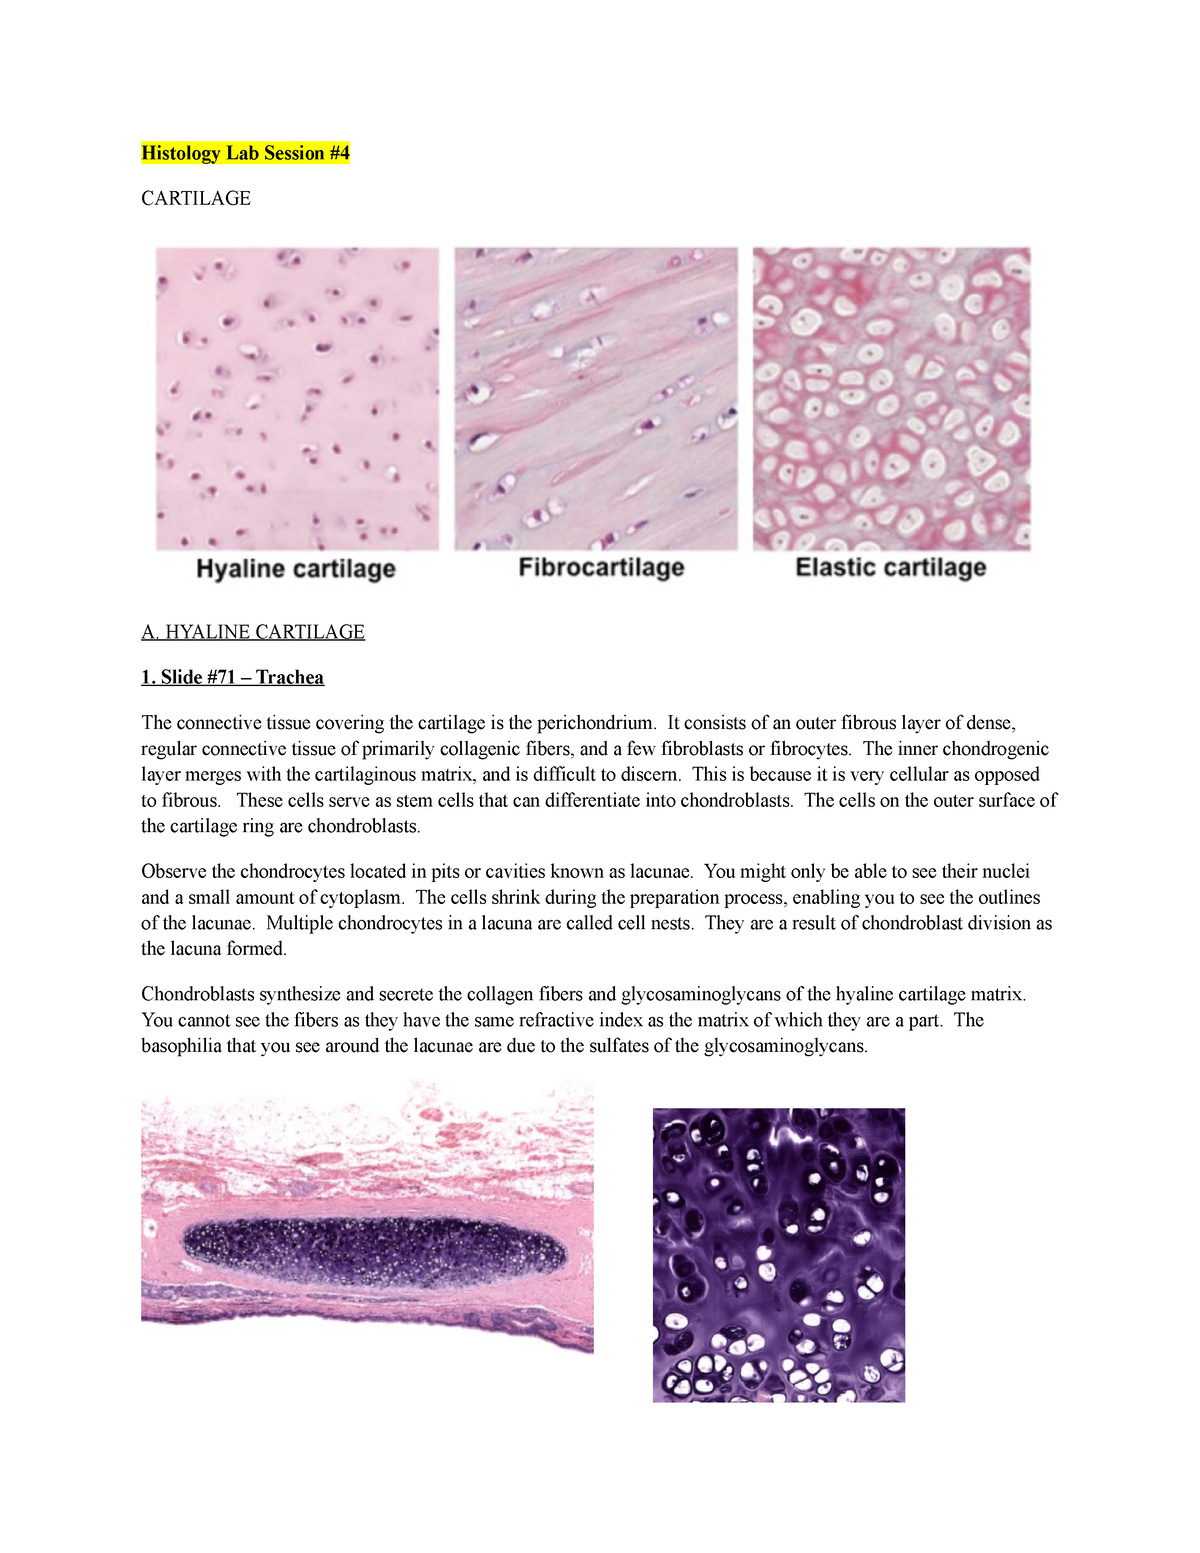 hyaline cartilage connective tissue trachea